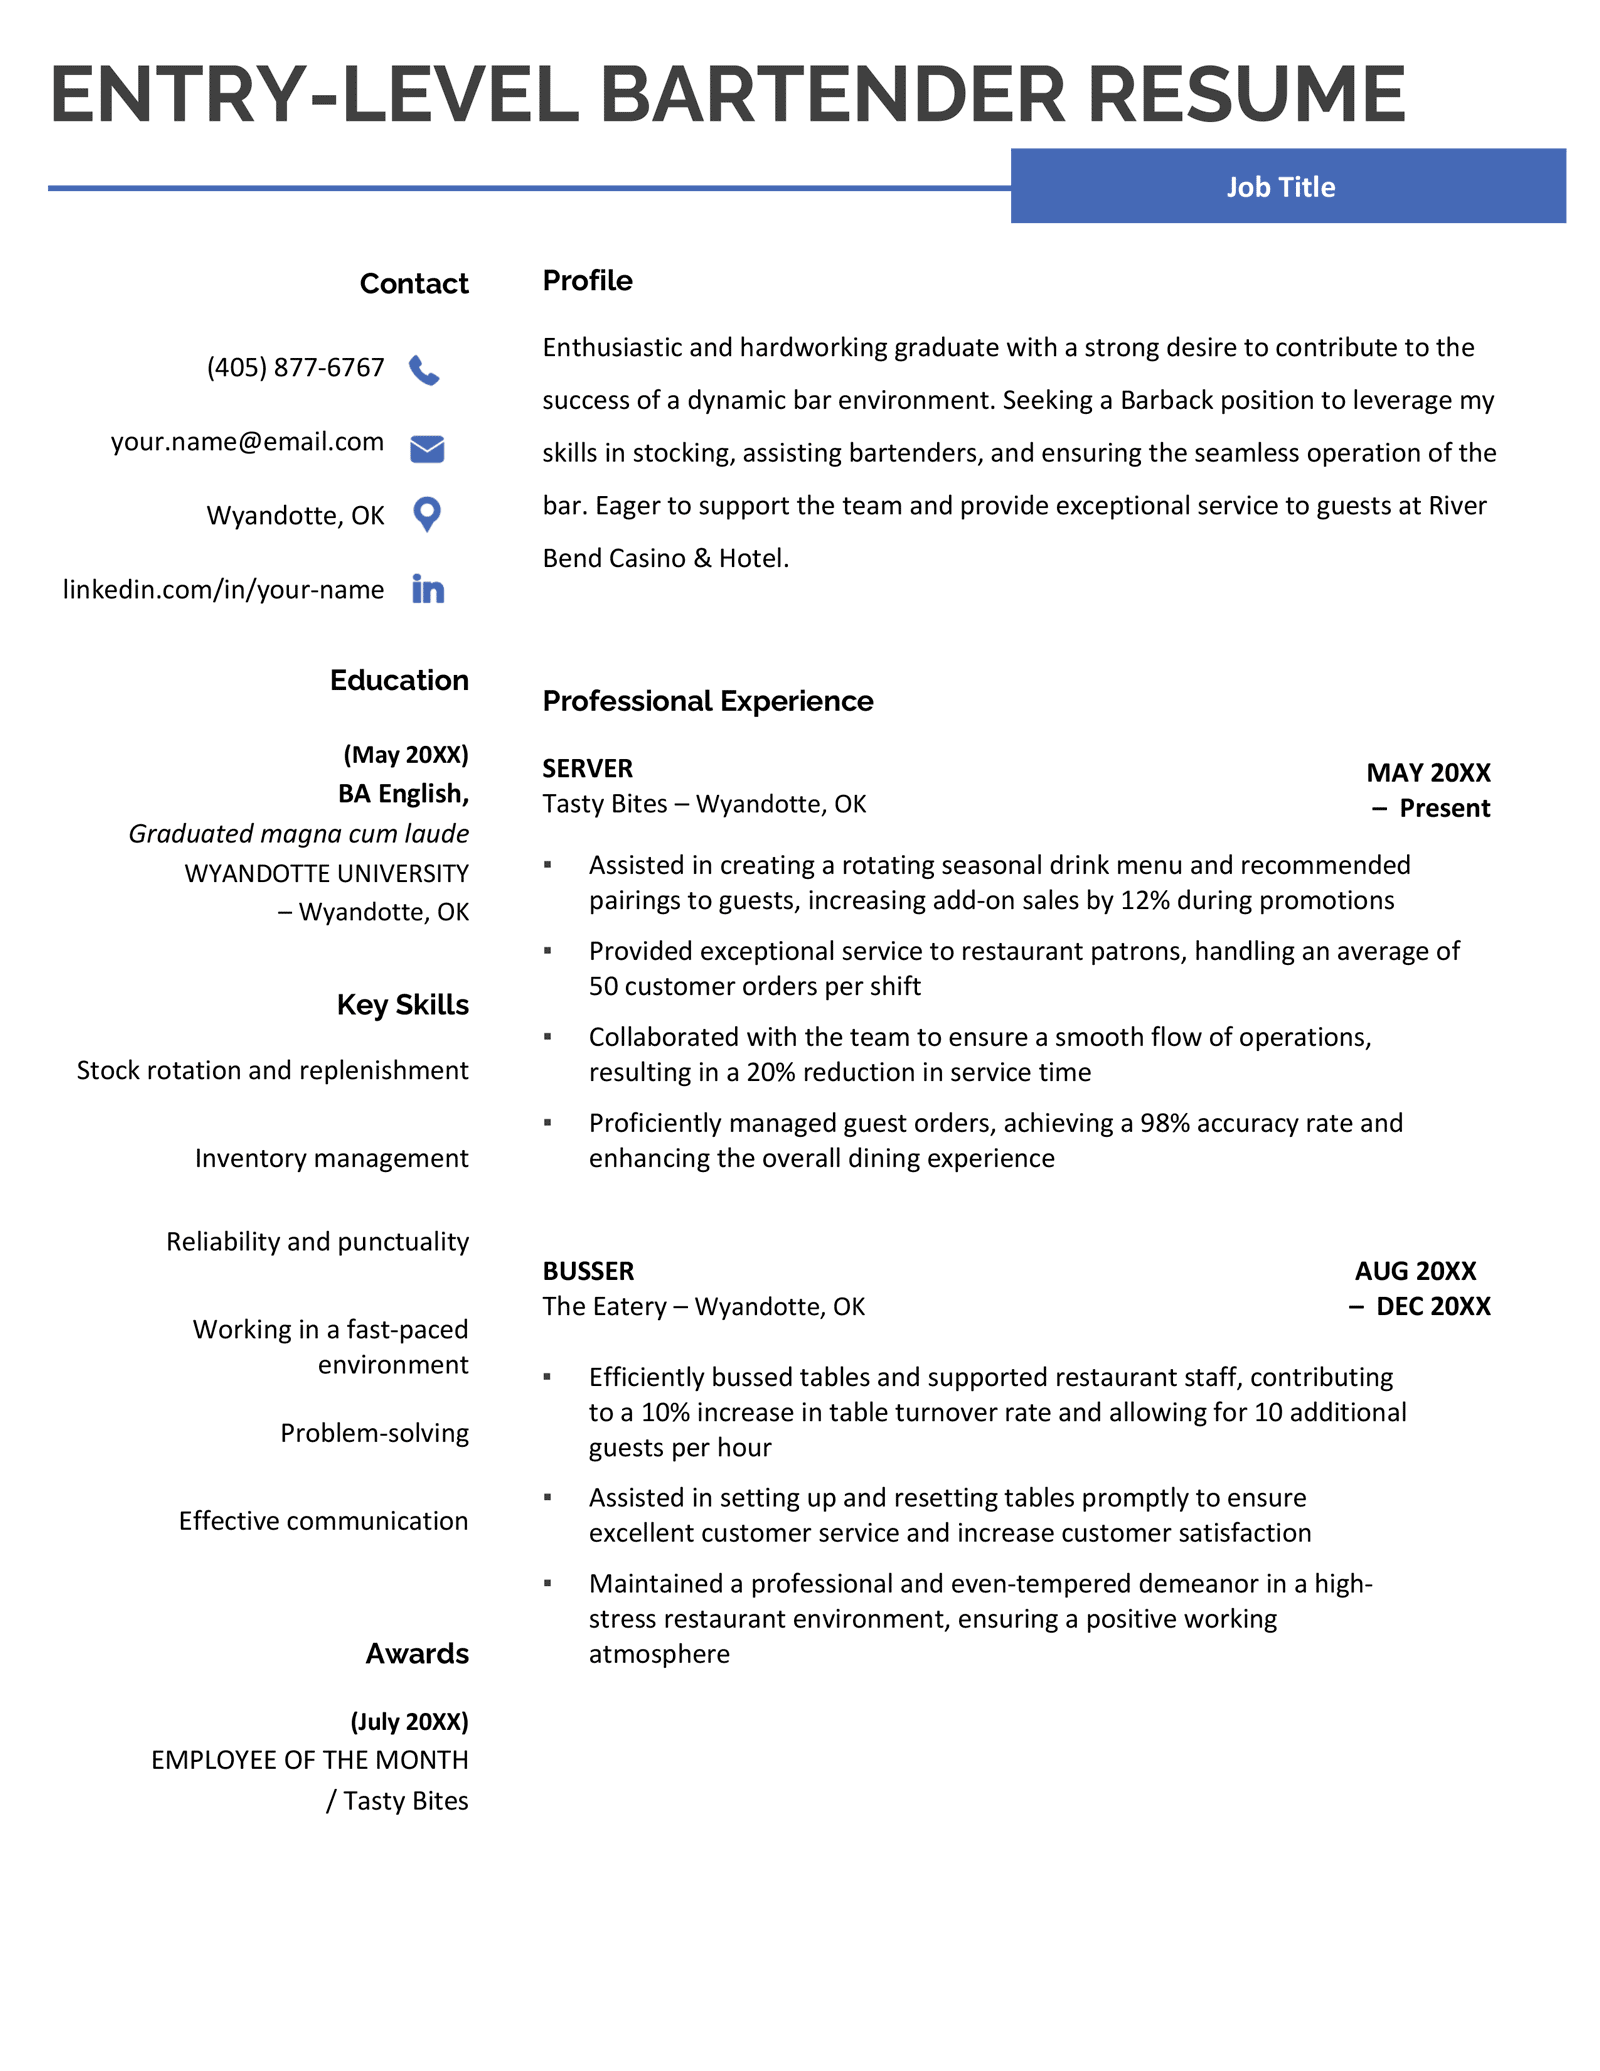 Example of an entry-level bartender resume that includes serving and bussing experience in a two-column resume layout with a blue header underline and features.